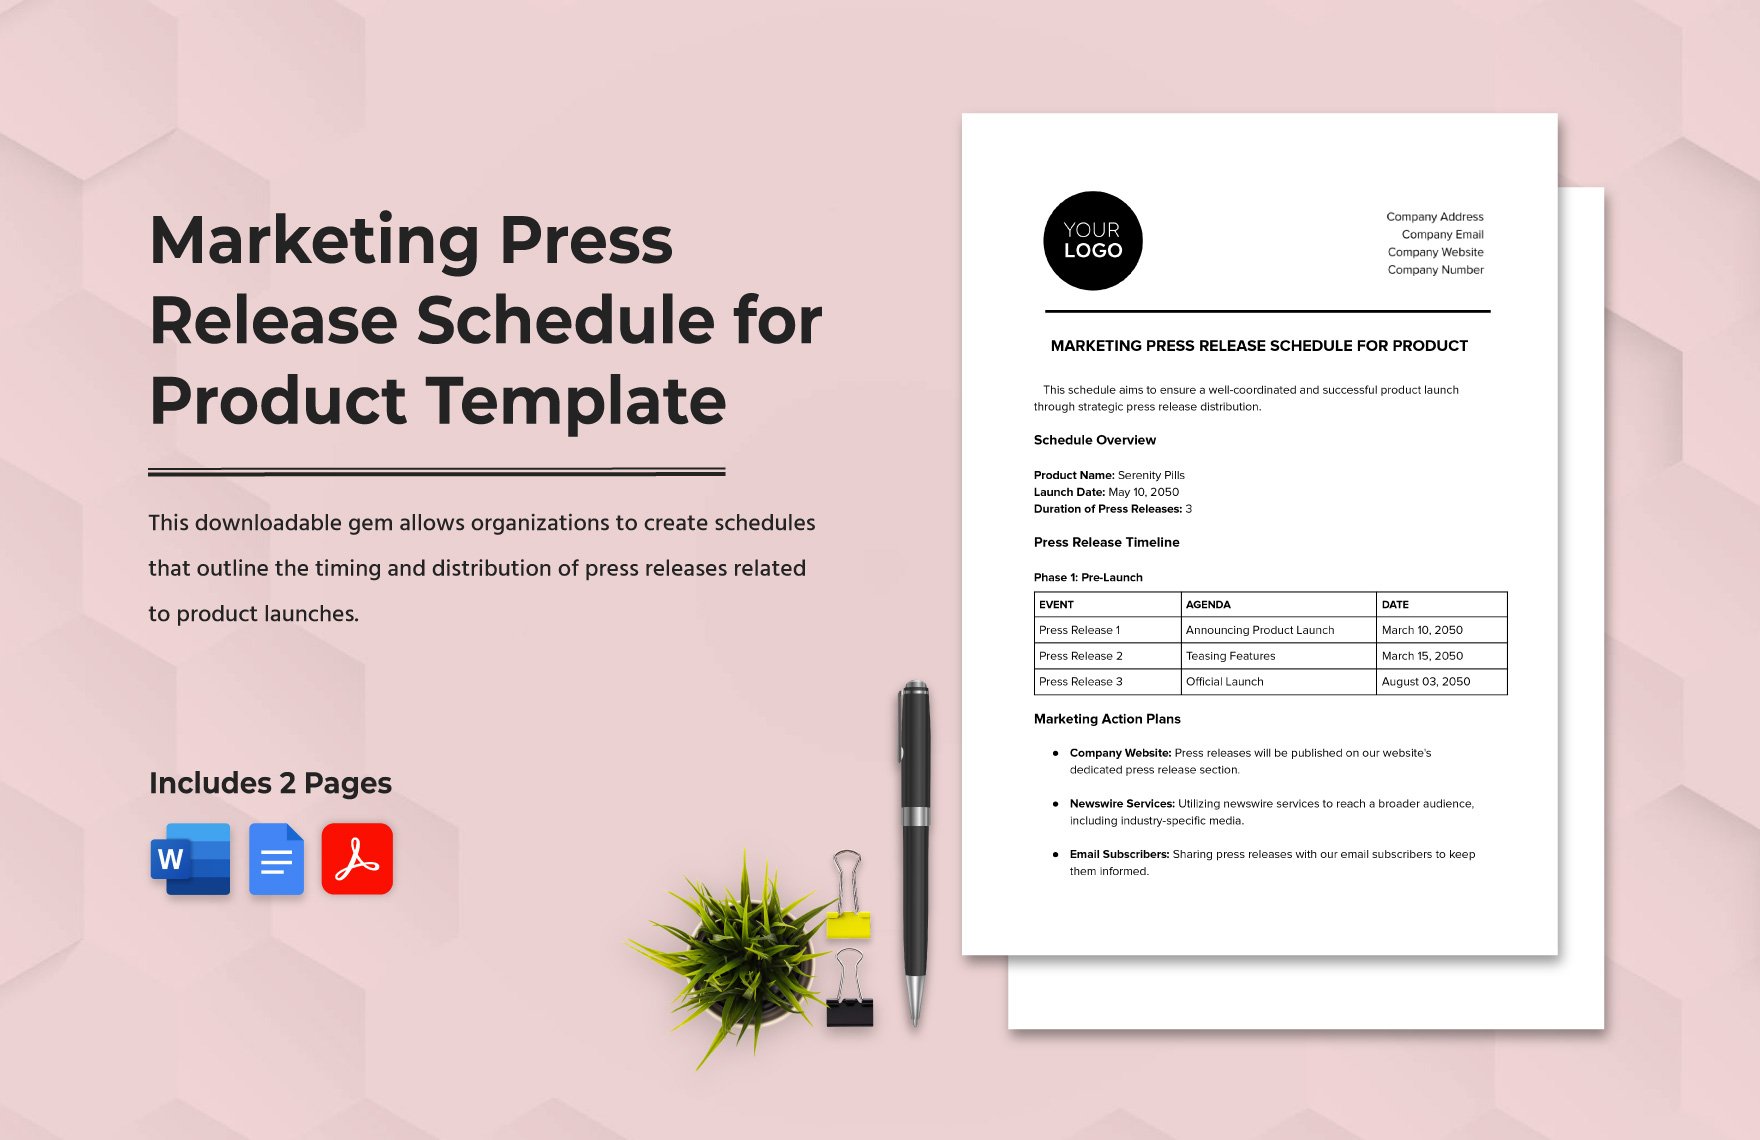 Marketing Press Release Schedule for Product Template in Word, Google Docs, PDF